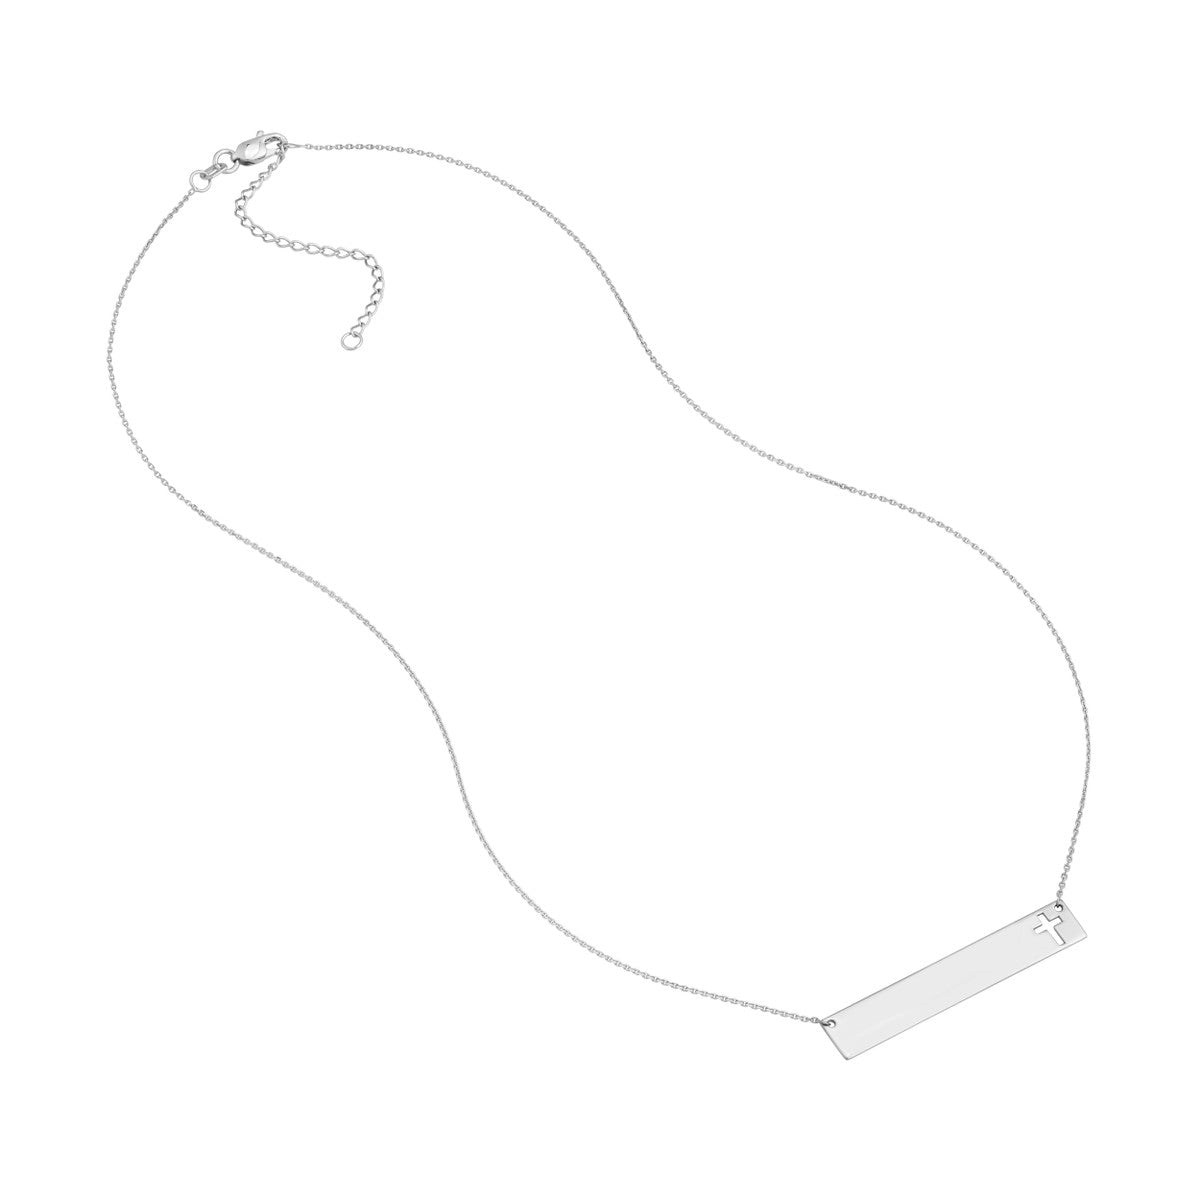 Plated Sterling Silver Bar Necklace with Cross